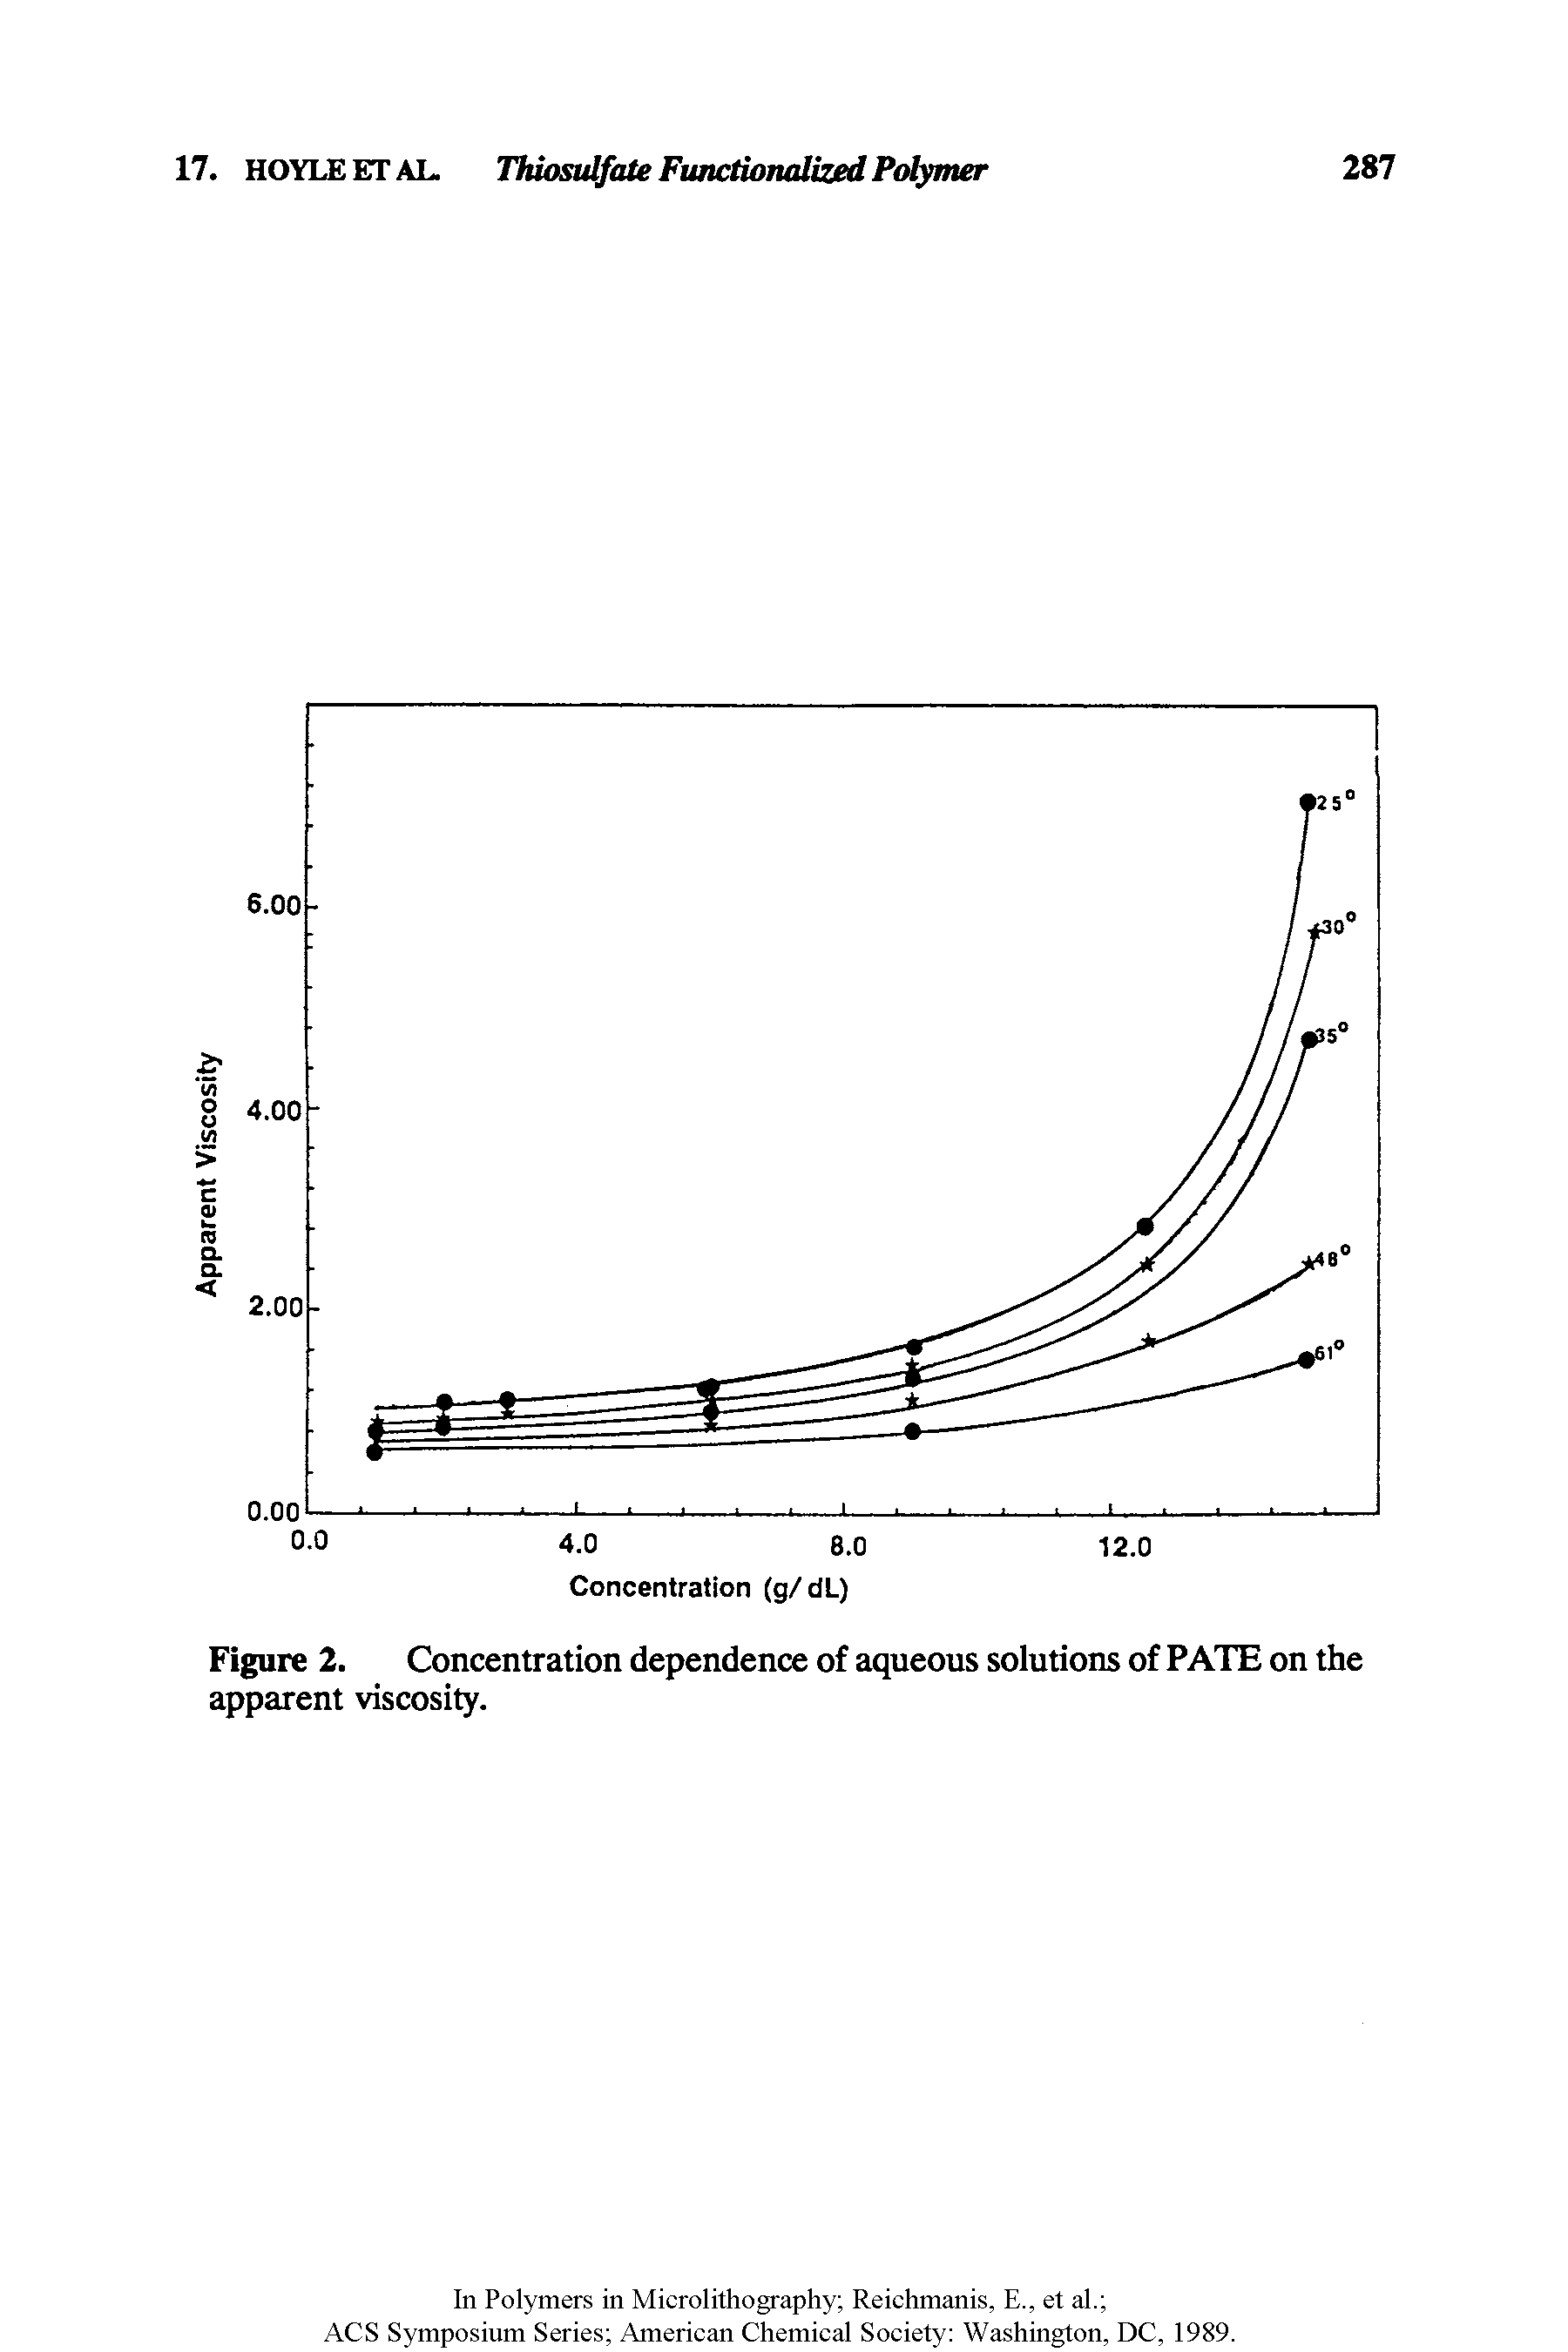 Figure 2. Concentration dependence of aqueous solutions of PATE on the apparent viscosity.